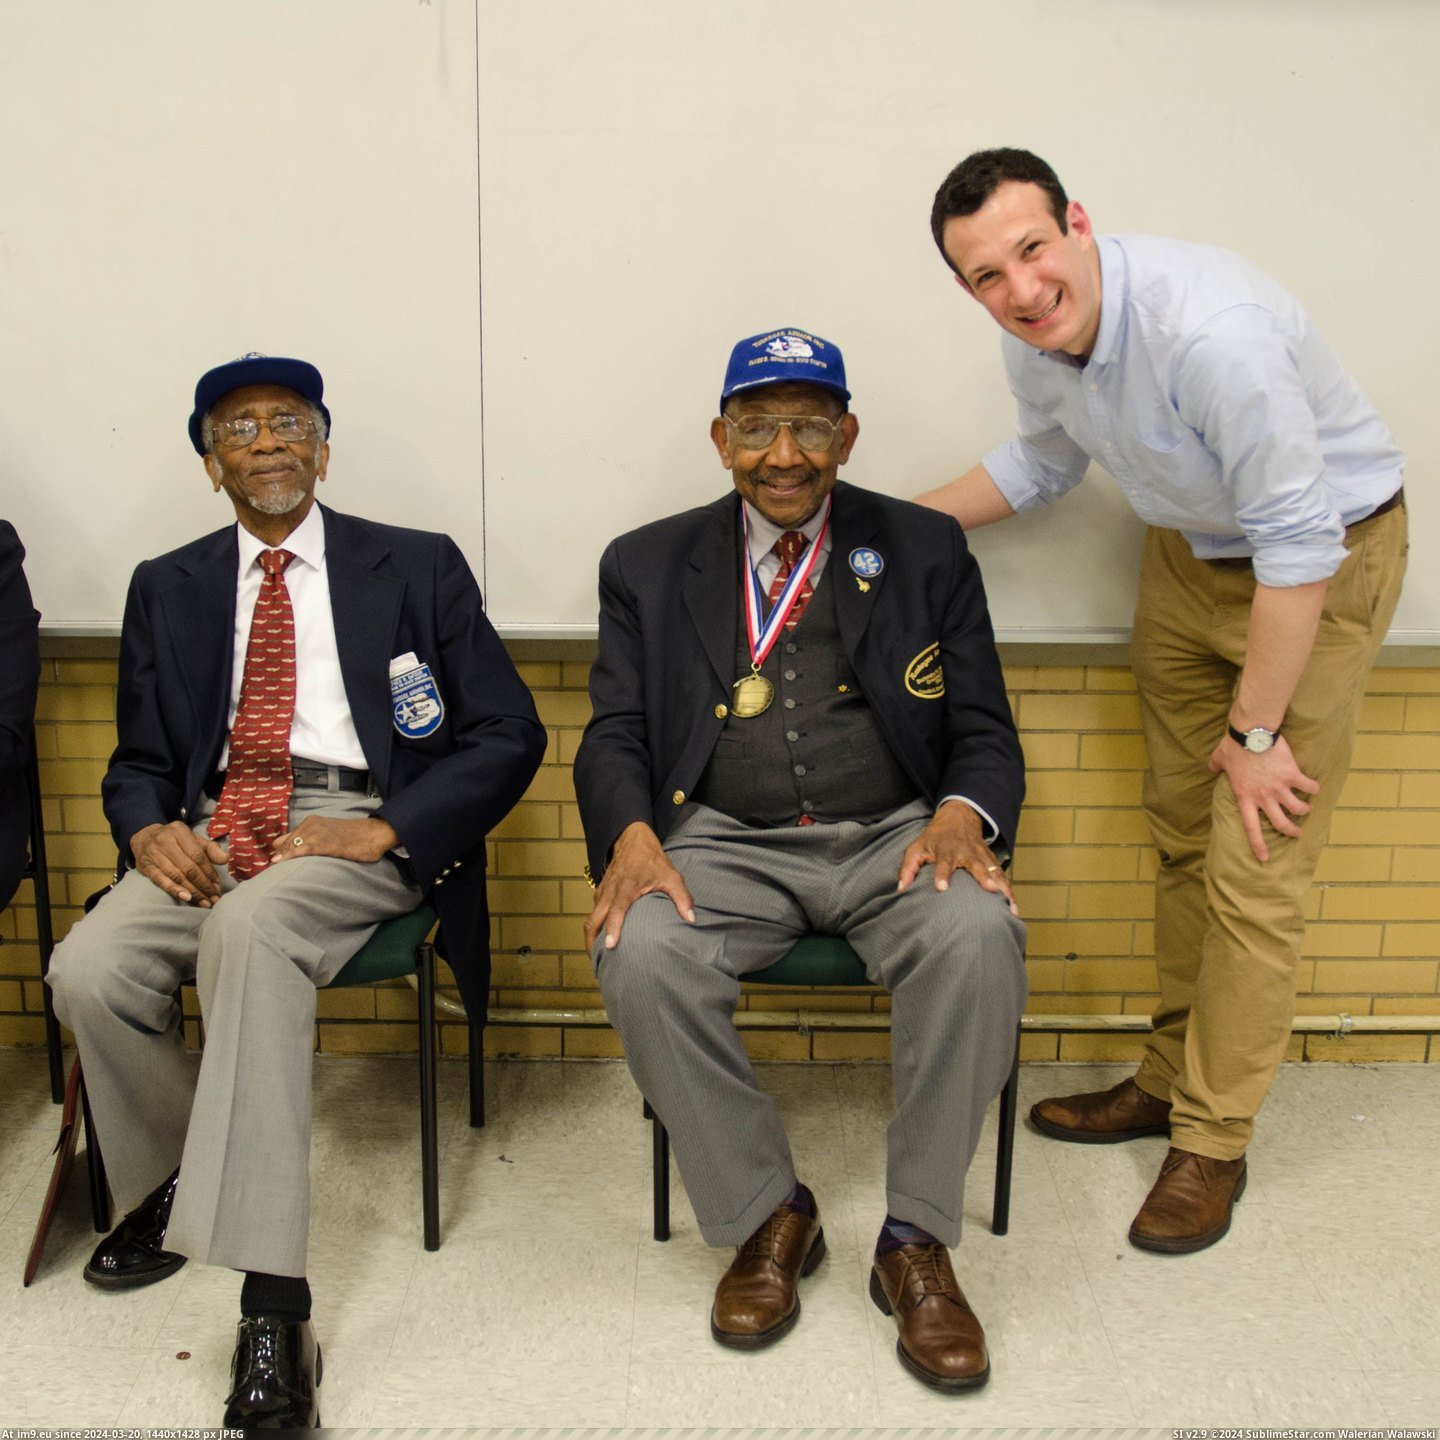 #Was #Teacher #American #Airmen #Tuskegee #History #Classes #Speak [Pics] I'm an American history teacher and was able to get 2 Tuskegee Airmen to come speak to my classes today Pic. (Obraz z album My r/PICS favs))